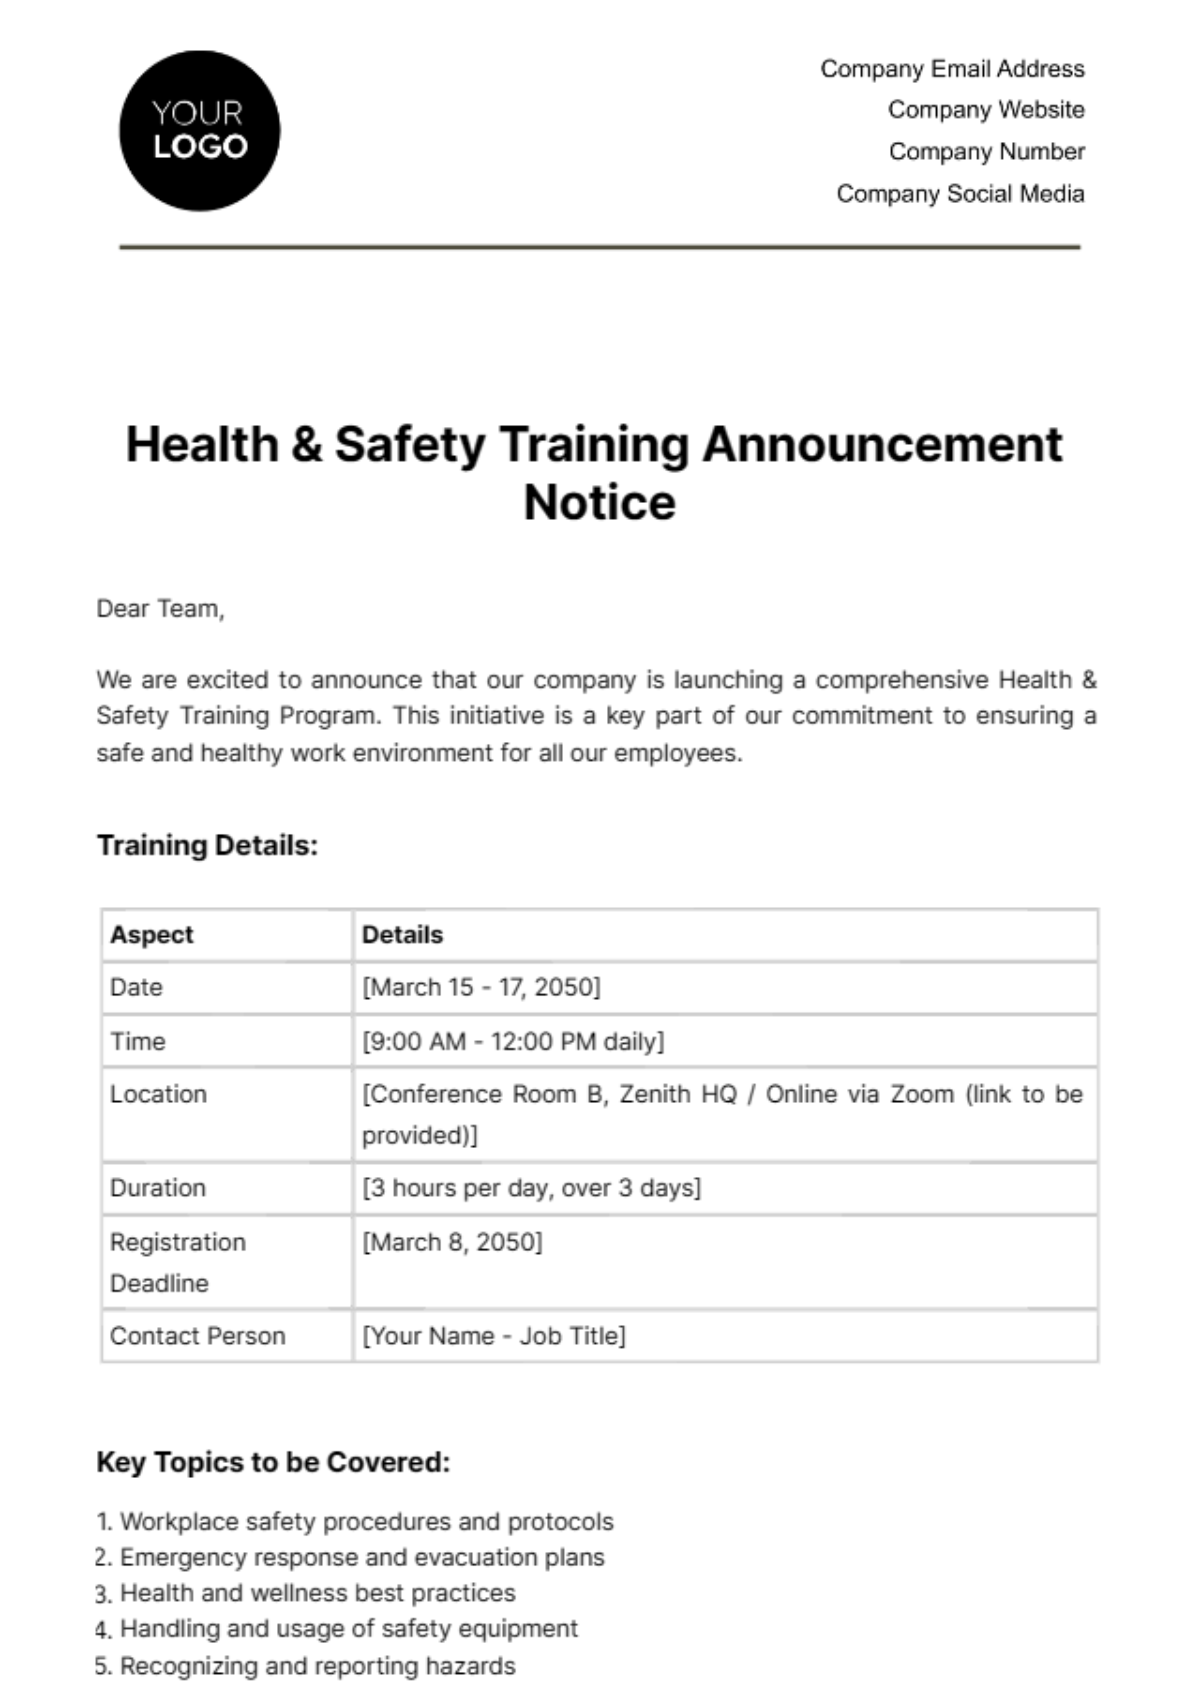 Health & Safety Training Announcement Notice Template